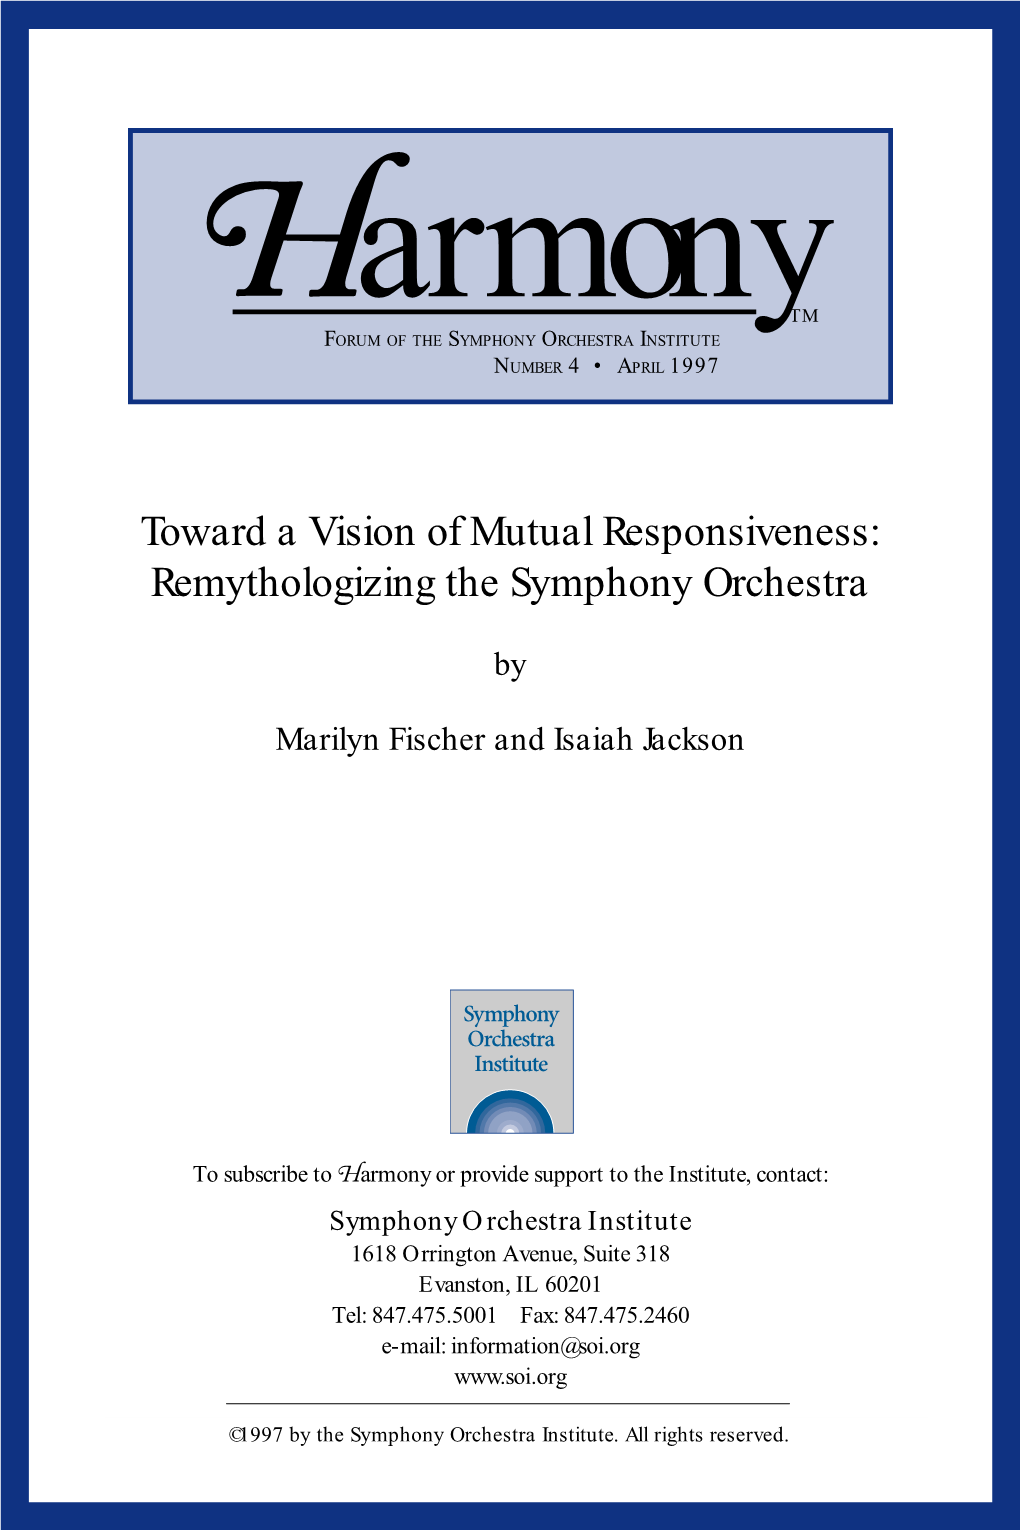 Toward a Vision of Mutual Responsiveness: Remythologizing the Symphony Orchestra